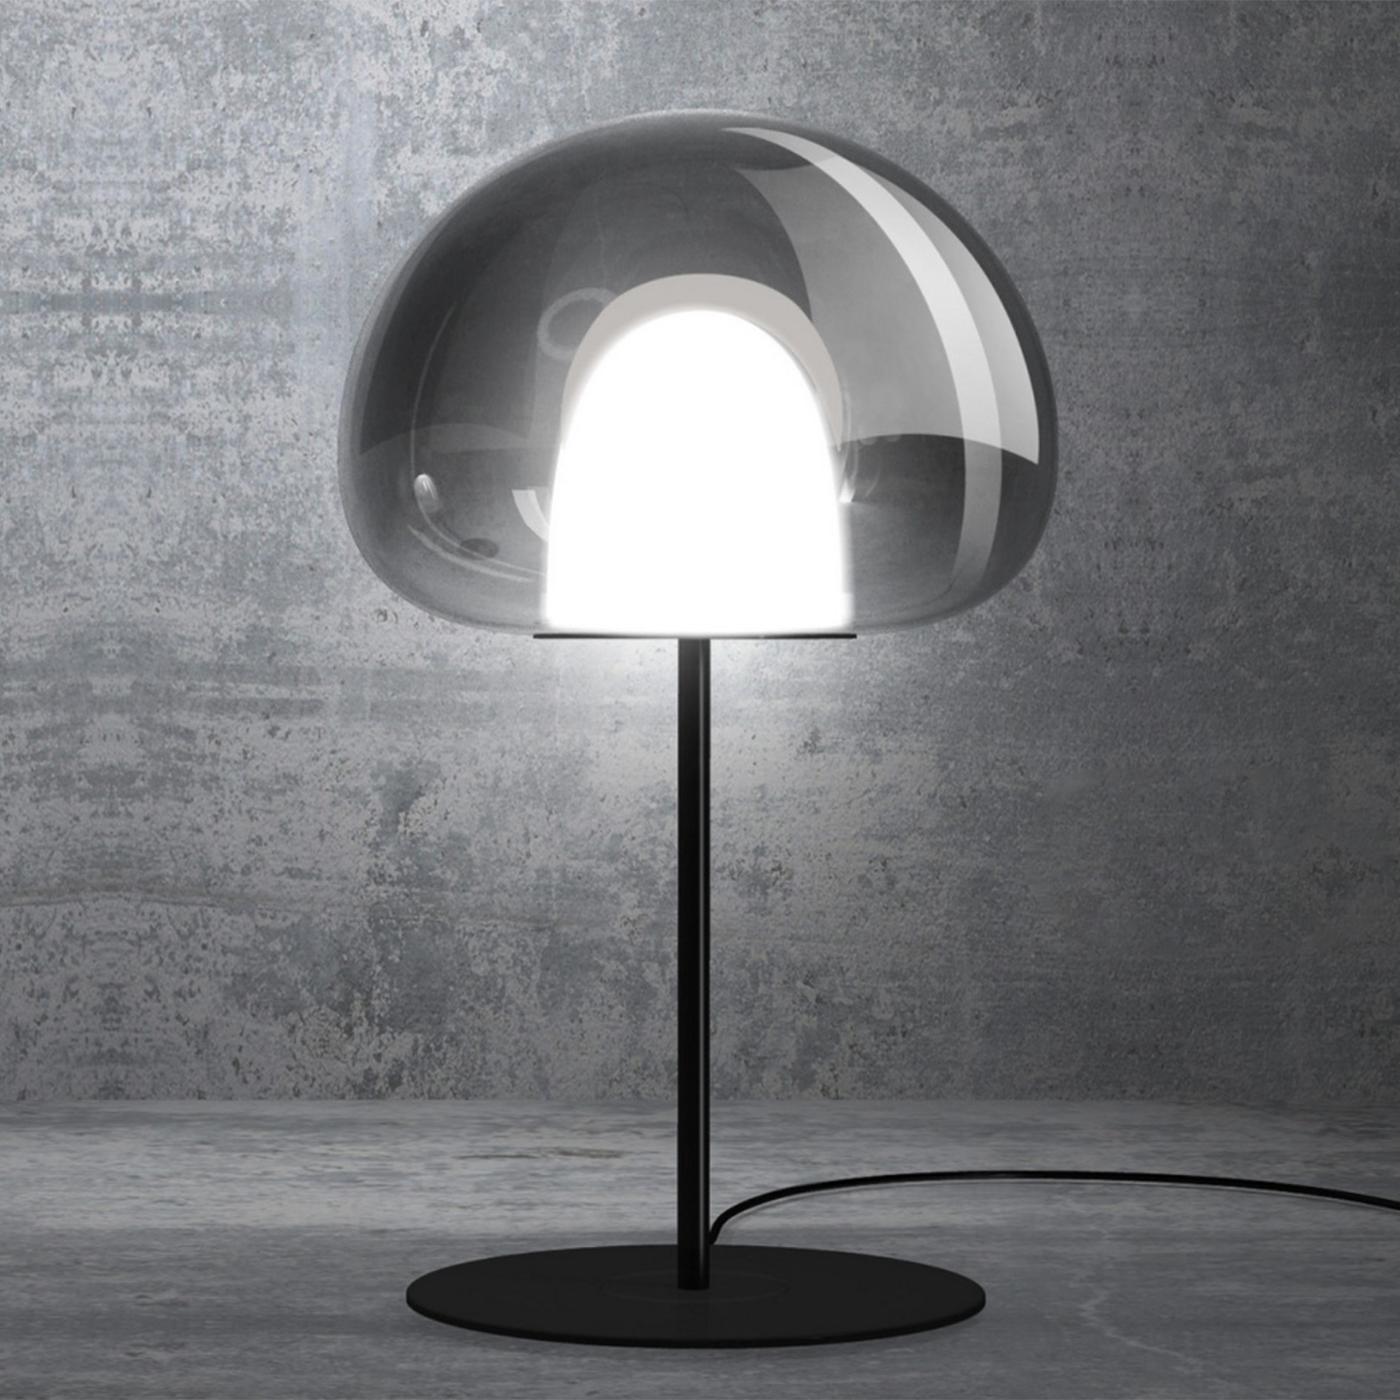 Table lamp denkan medium with painted iron base
in matte black finish and with blown glass shade.
With 1 source, LED 3,85 Watts (2700K, CRI>90, 640Lm).
Dimmer included.